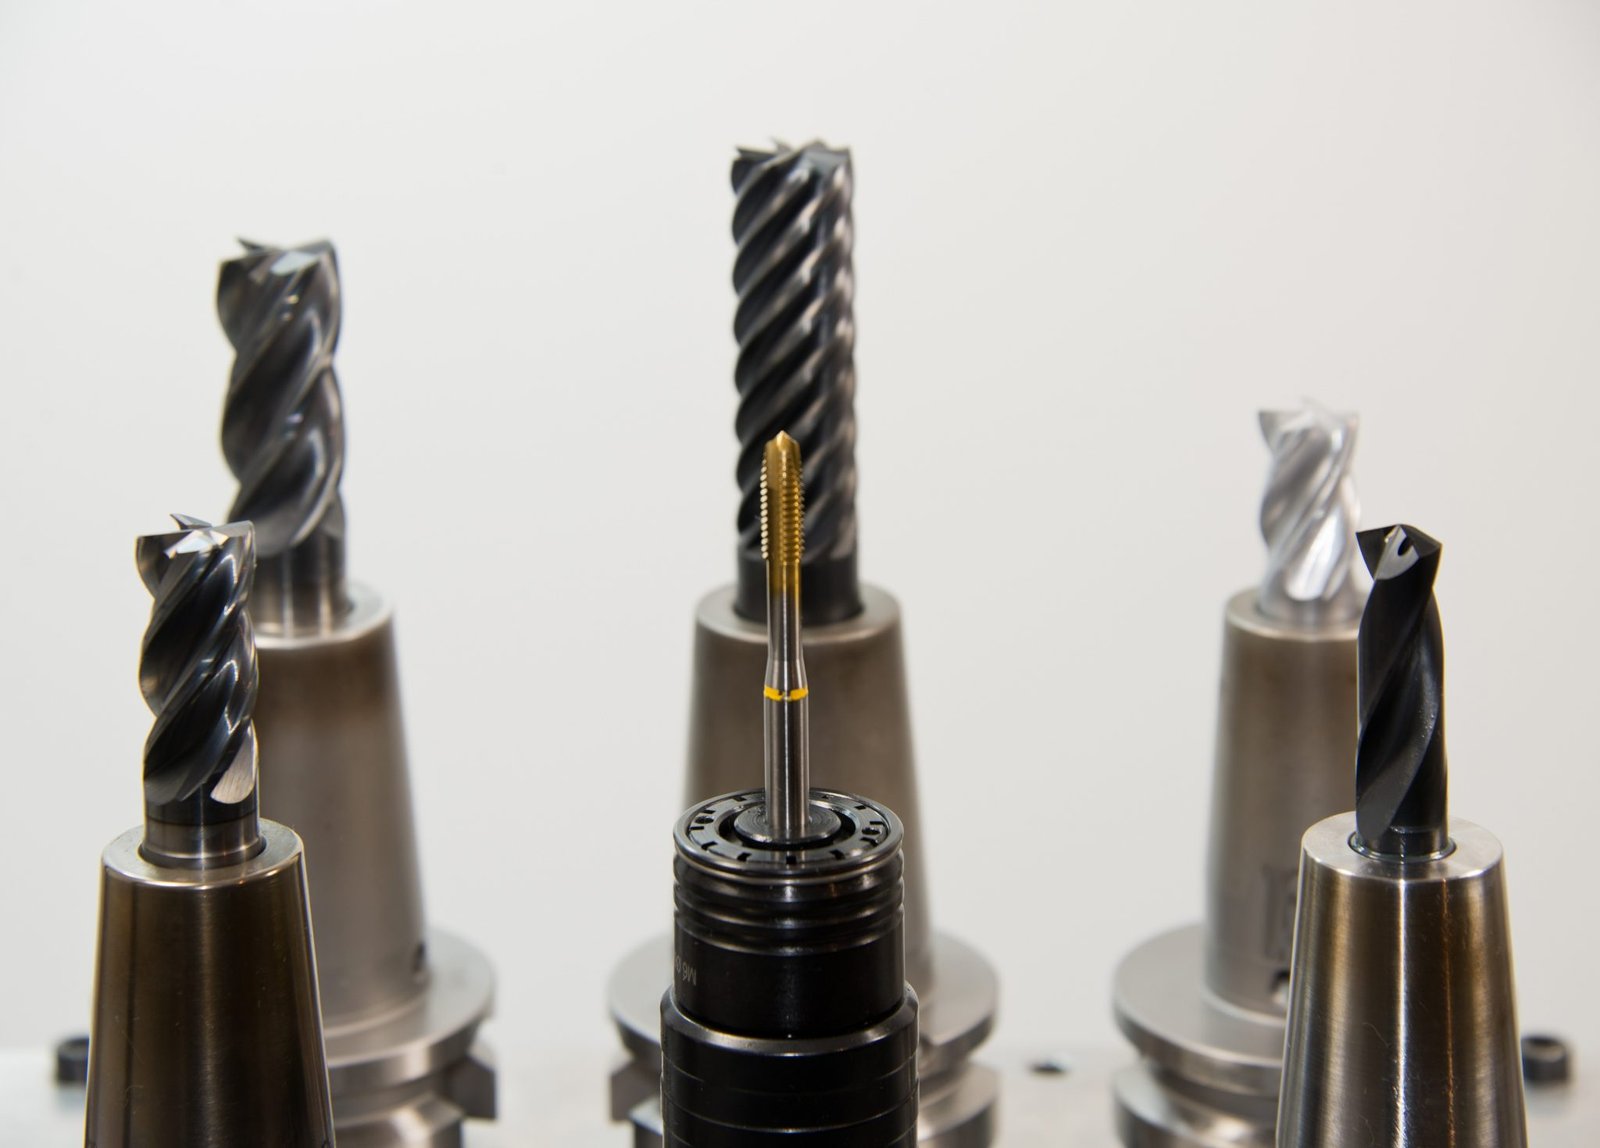 sharpen drill bits with lathe